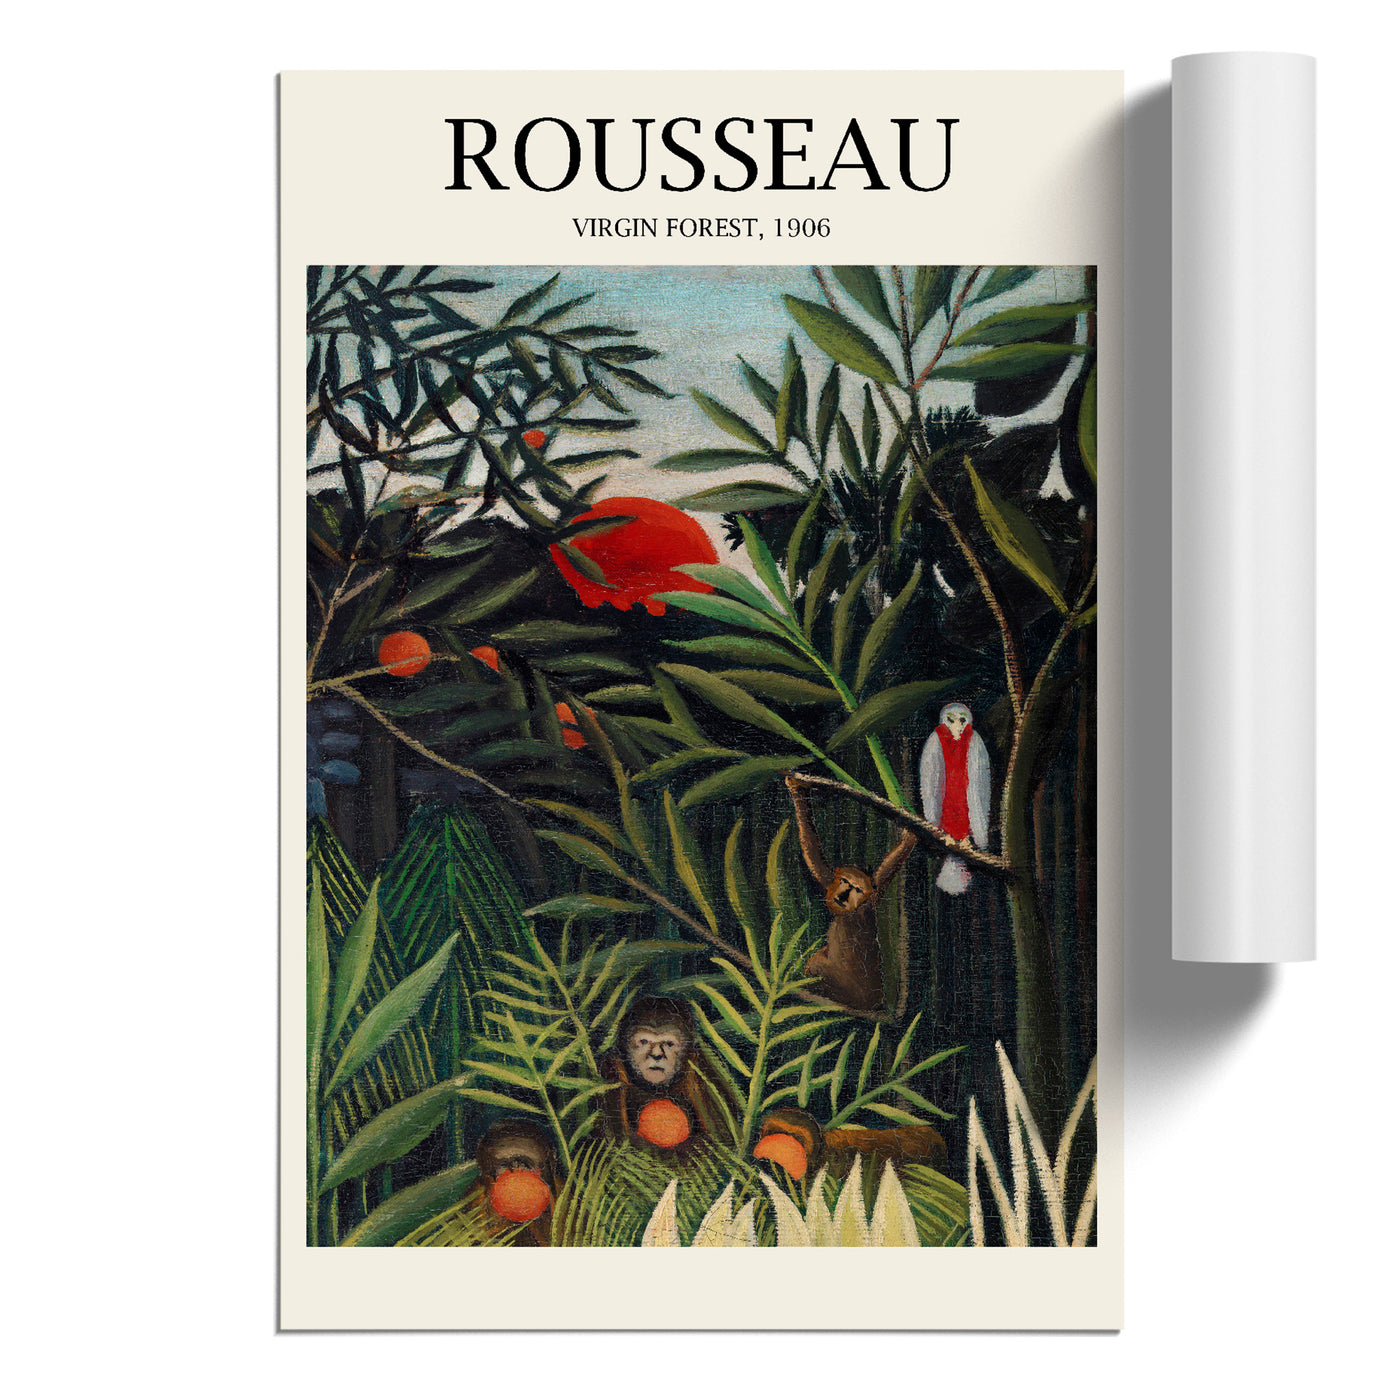 Monkeys And Parrot In The Virgin Forest Print By Henri Rousseau